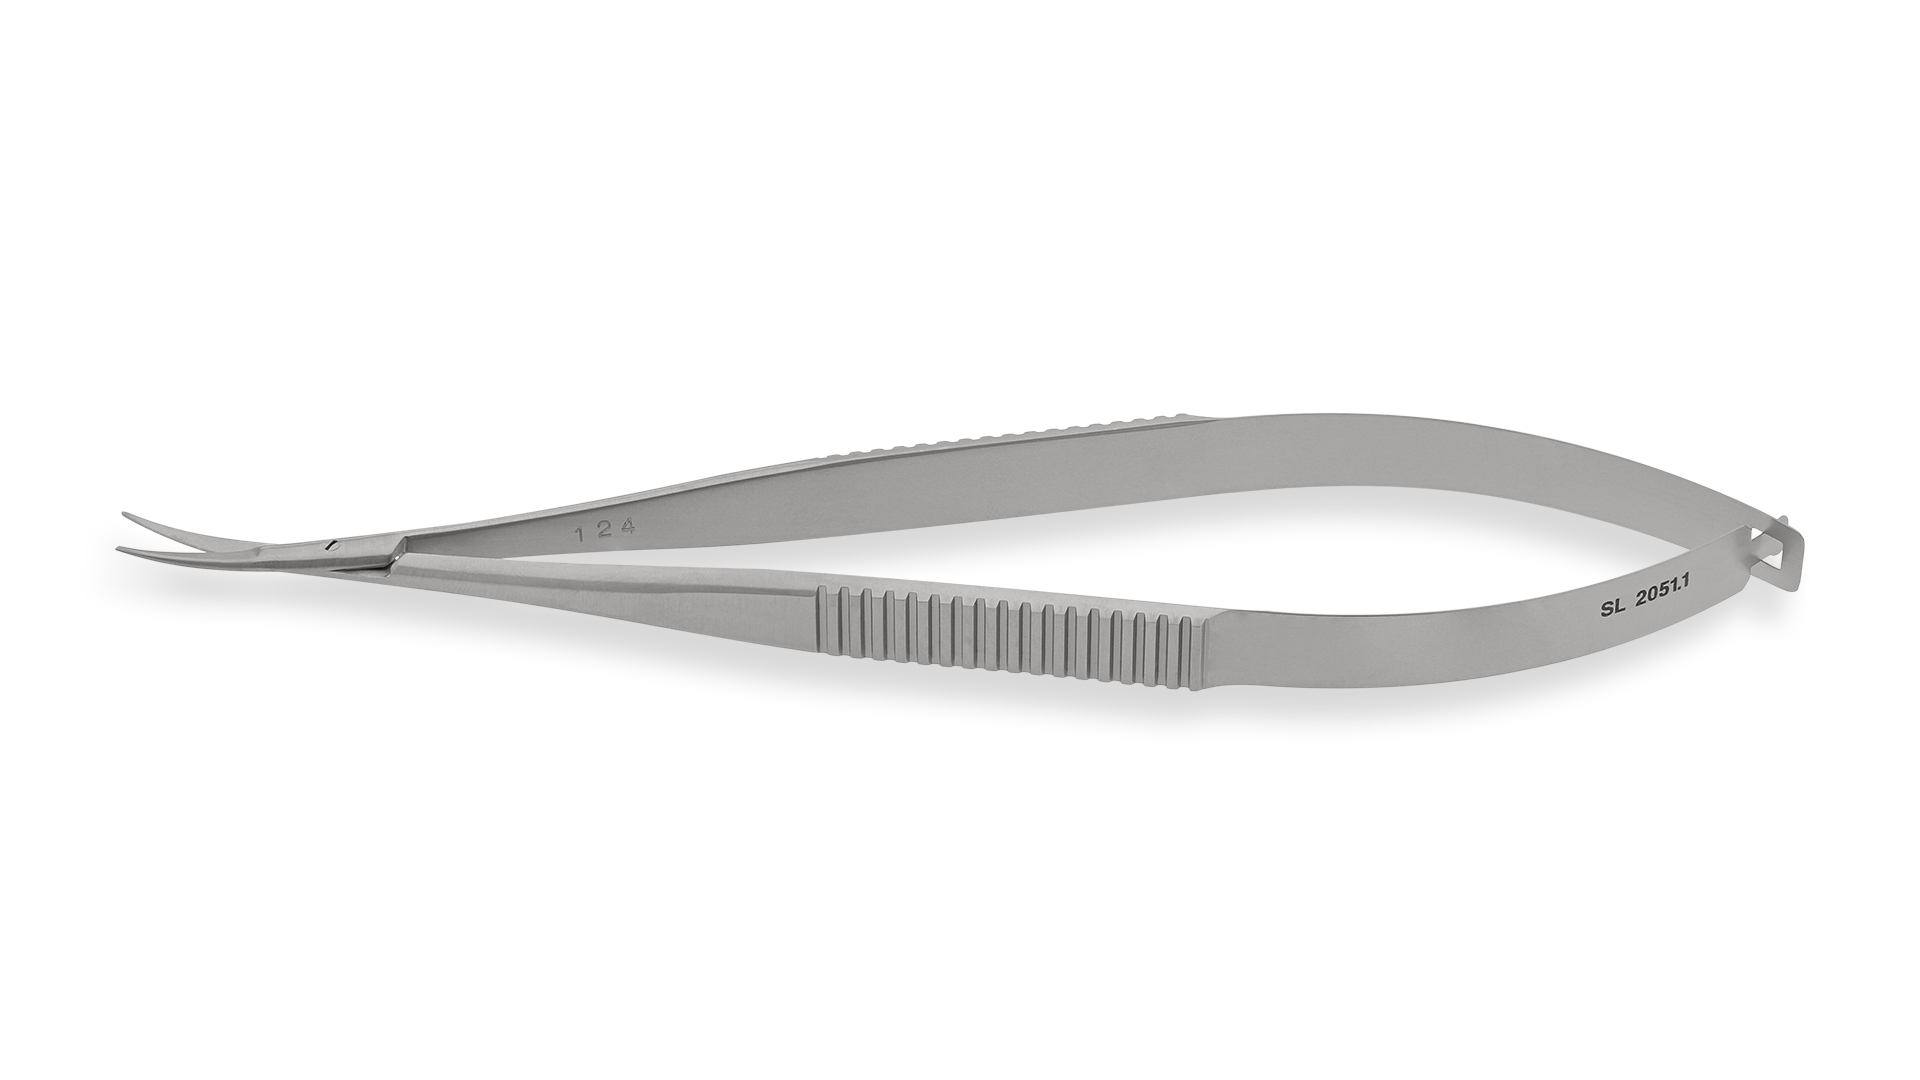 Micro Scissors, Stainless Steel, Surgical Instruments